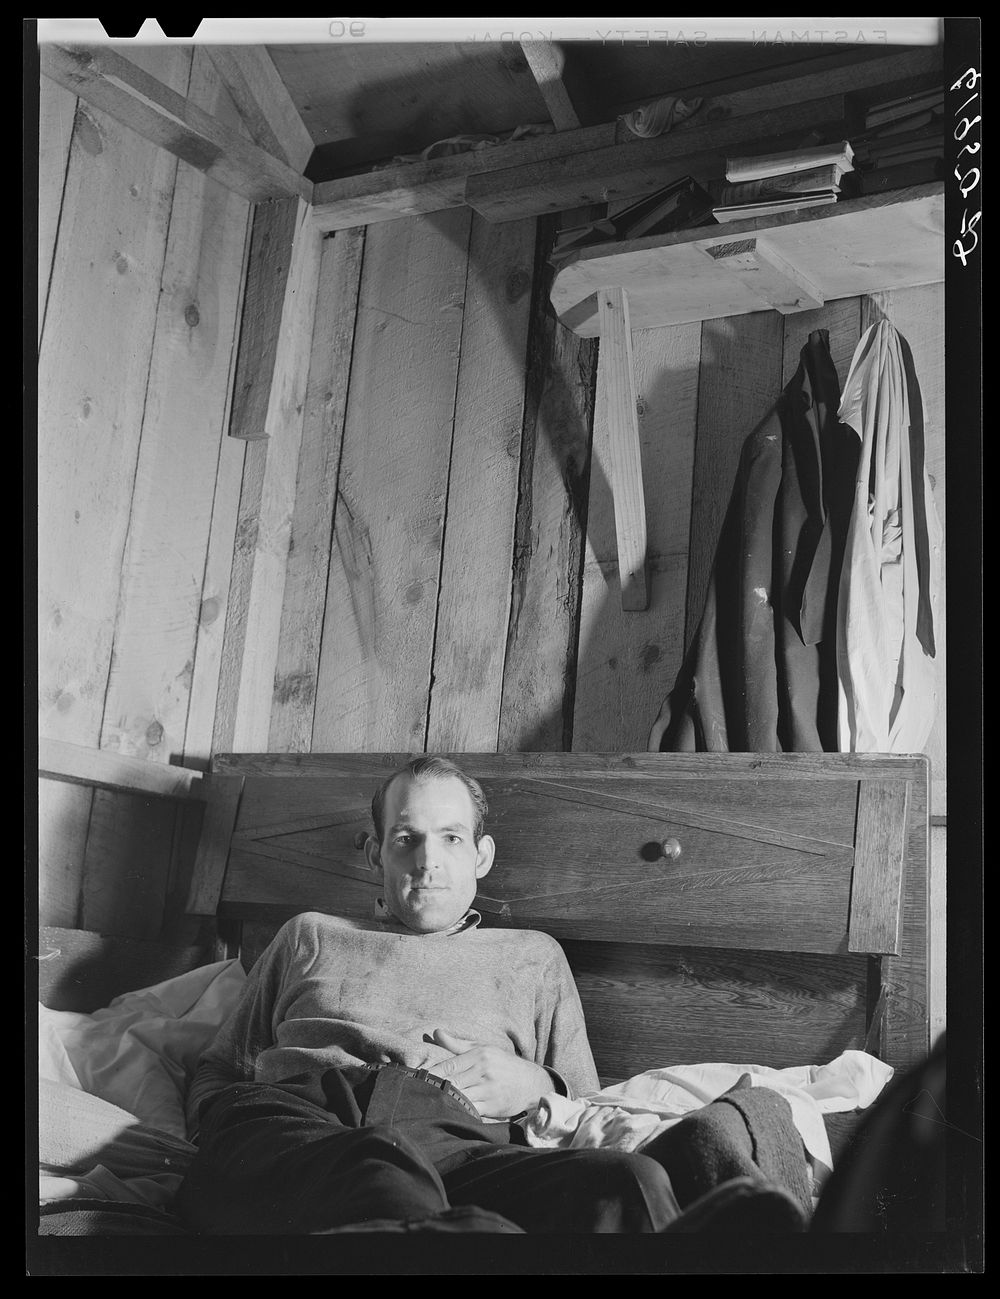 W.W. McDaniel, rigger at Hercules powder plant, in his bunkhouse in the rear of Mrs. Pritchard's boardinghouse. Radford…